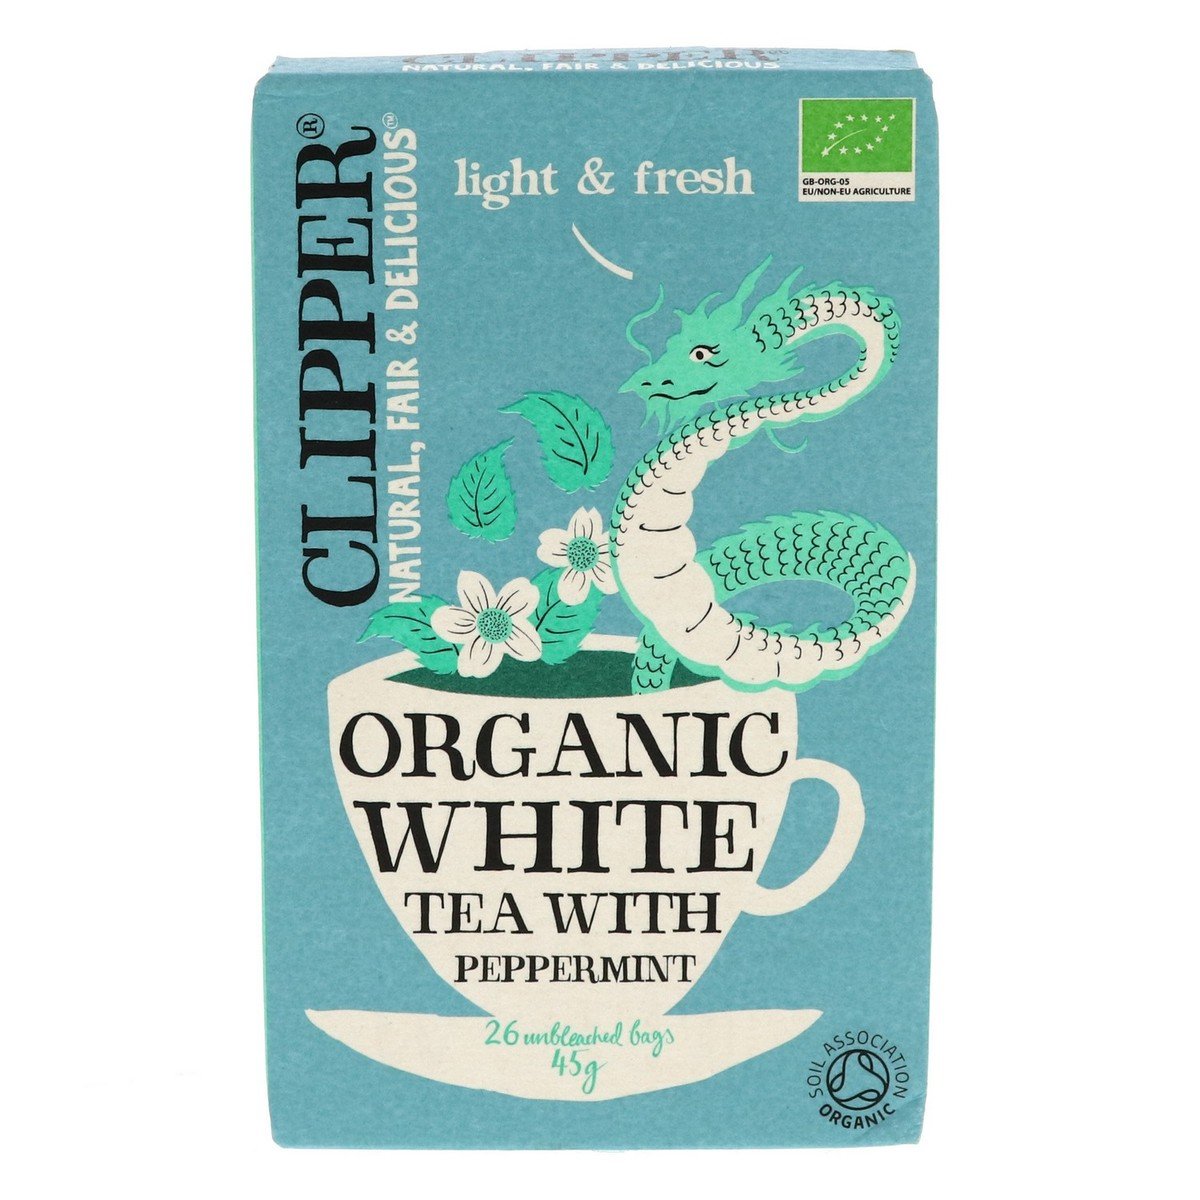 Clipper Organic White Tea With Peppermint 26 pcs